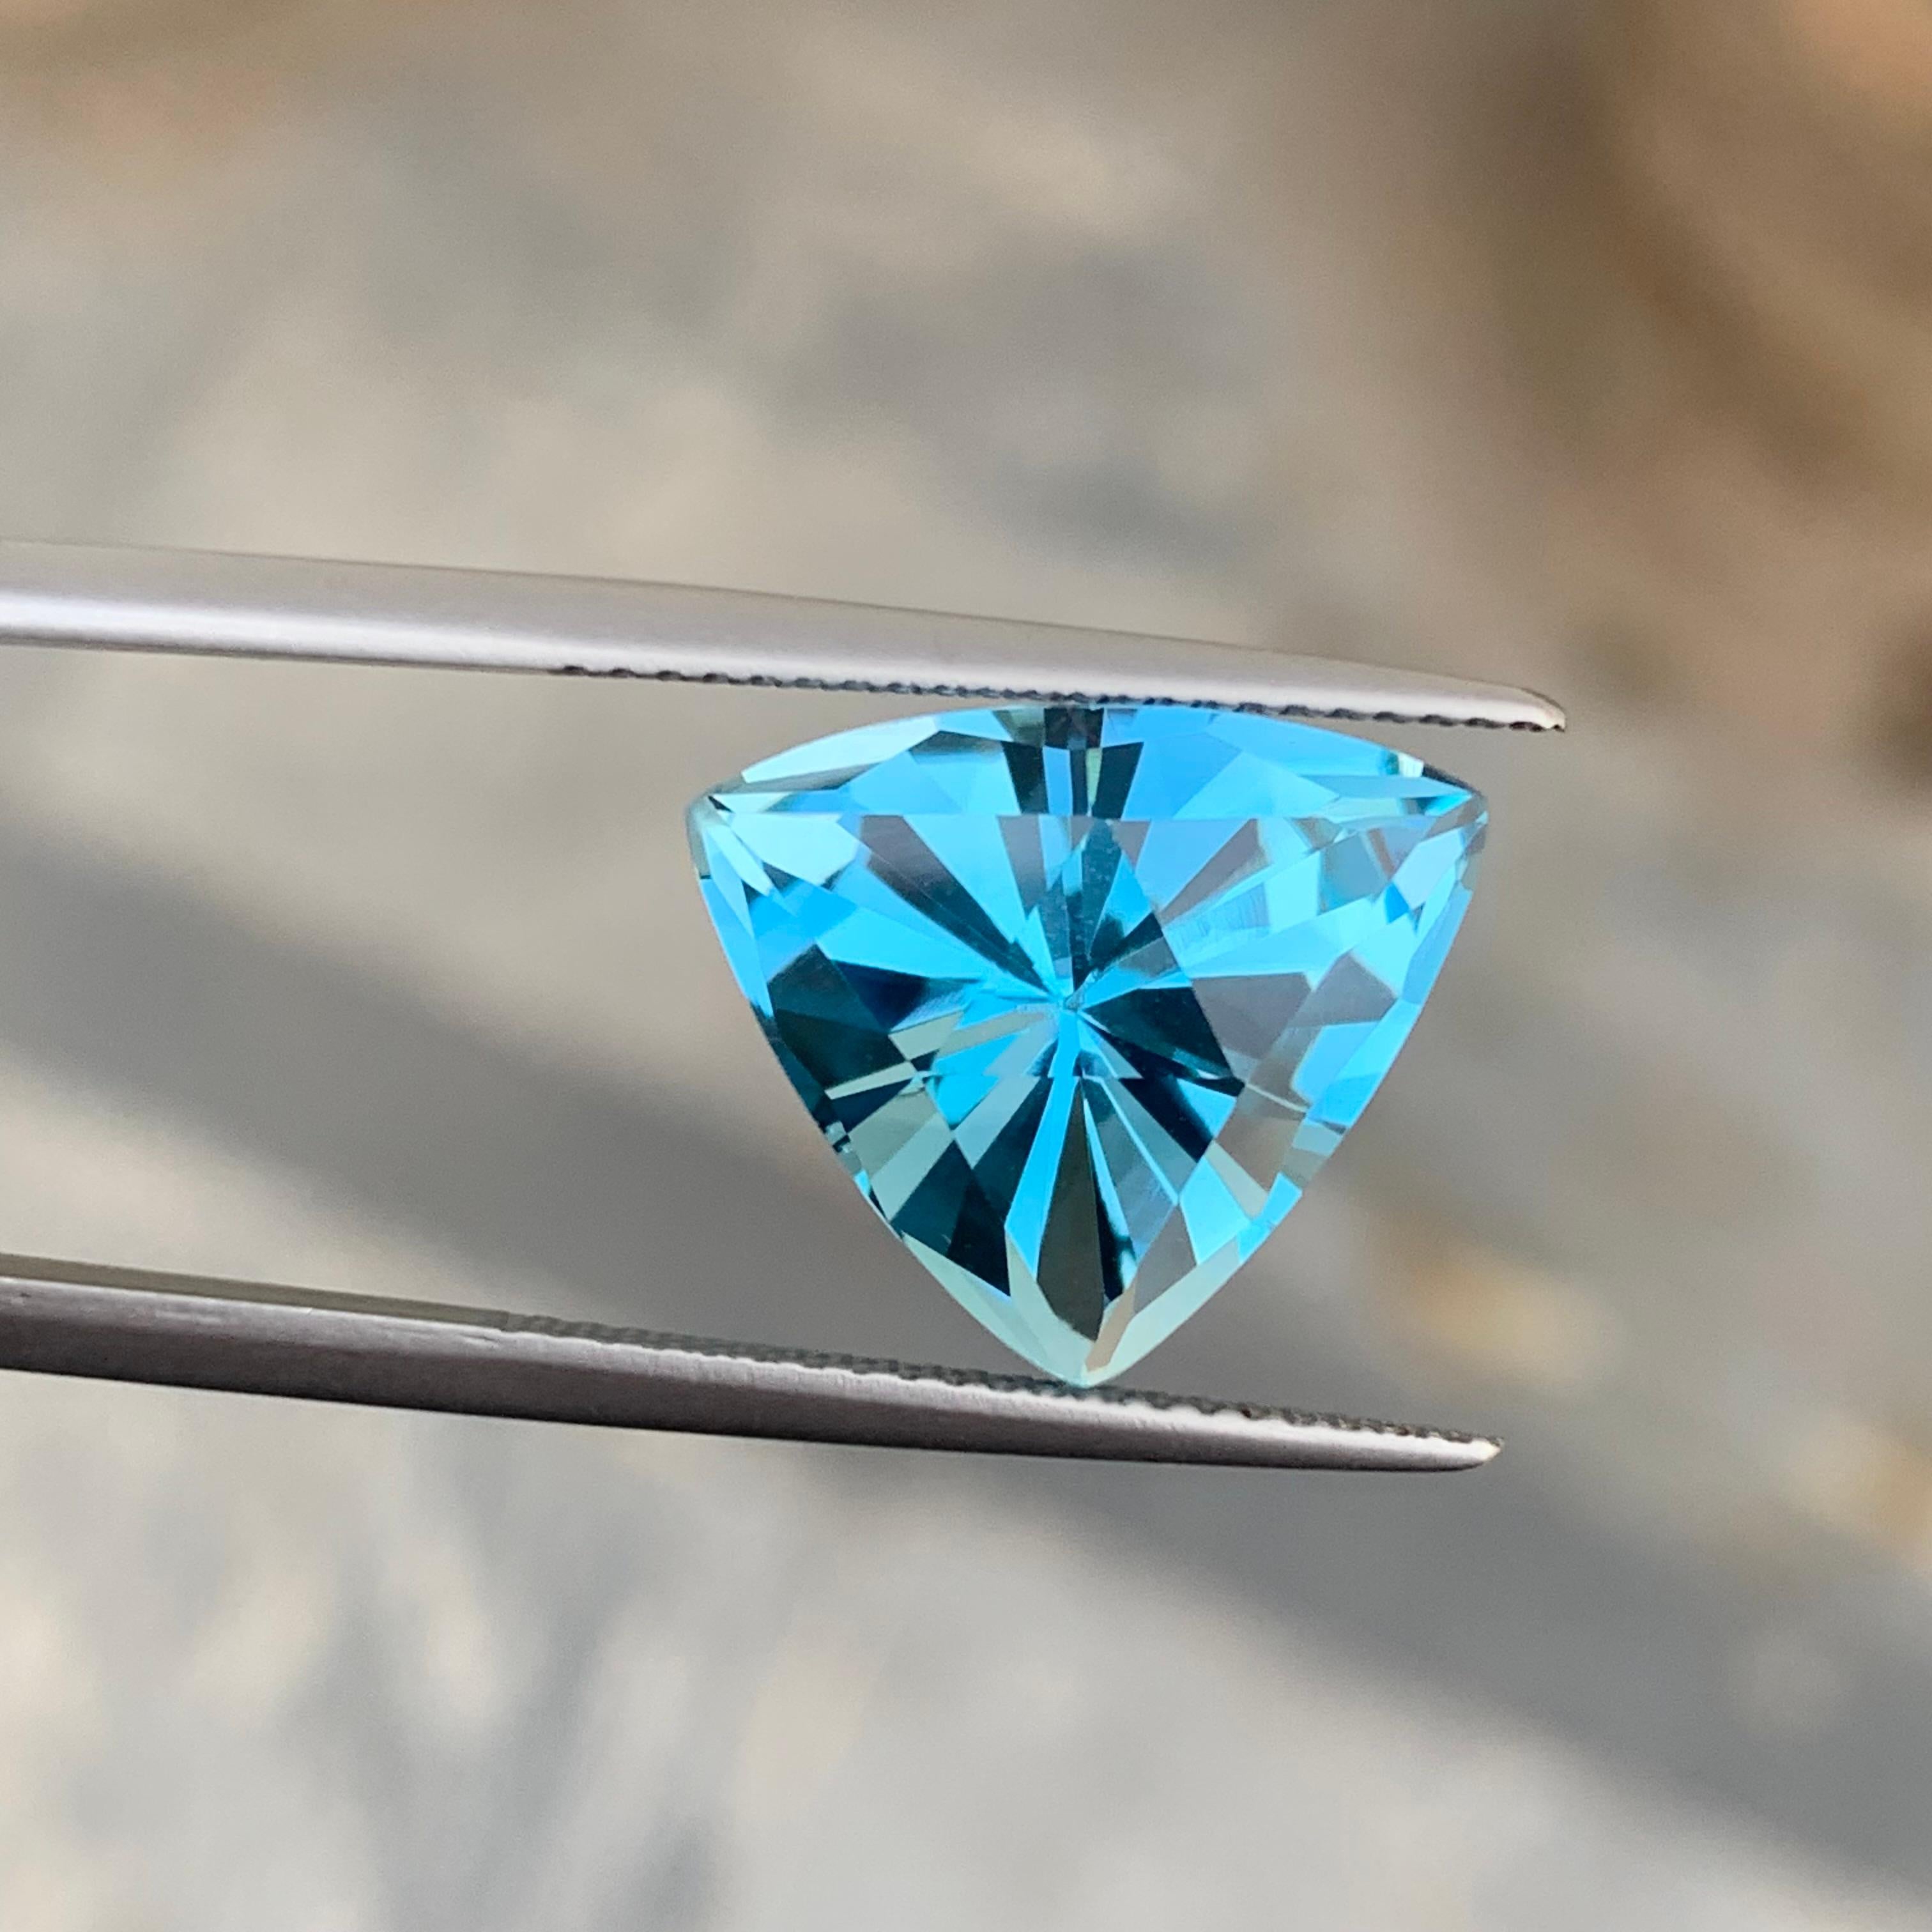 Genuine 9.0 Carat Trillion Cut Loose Blue Topaz from Brazil Available for Sell For Sale 1